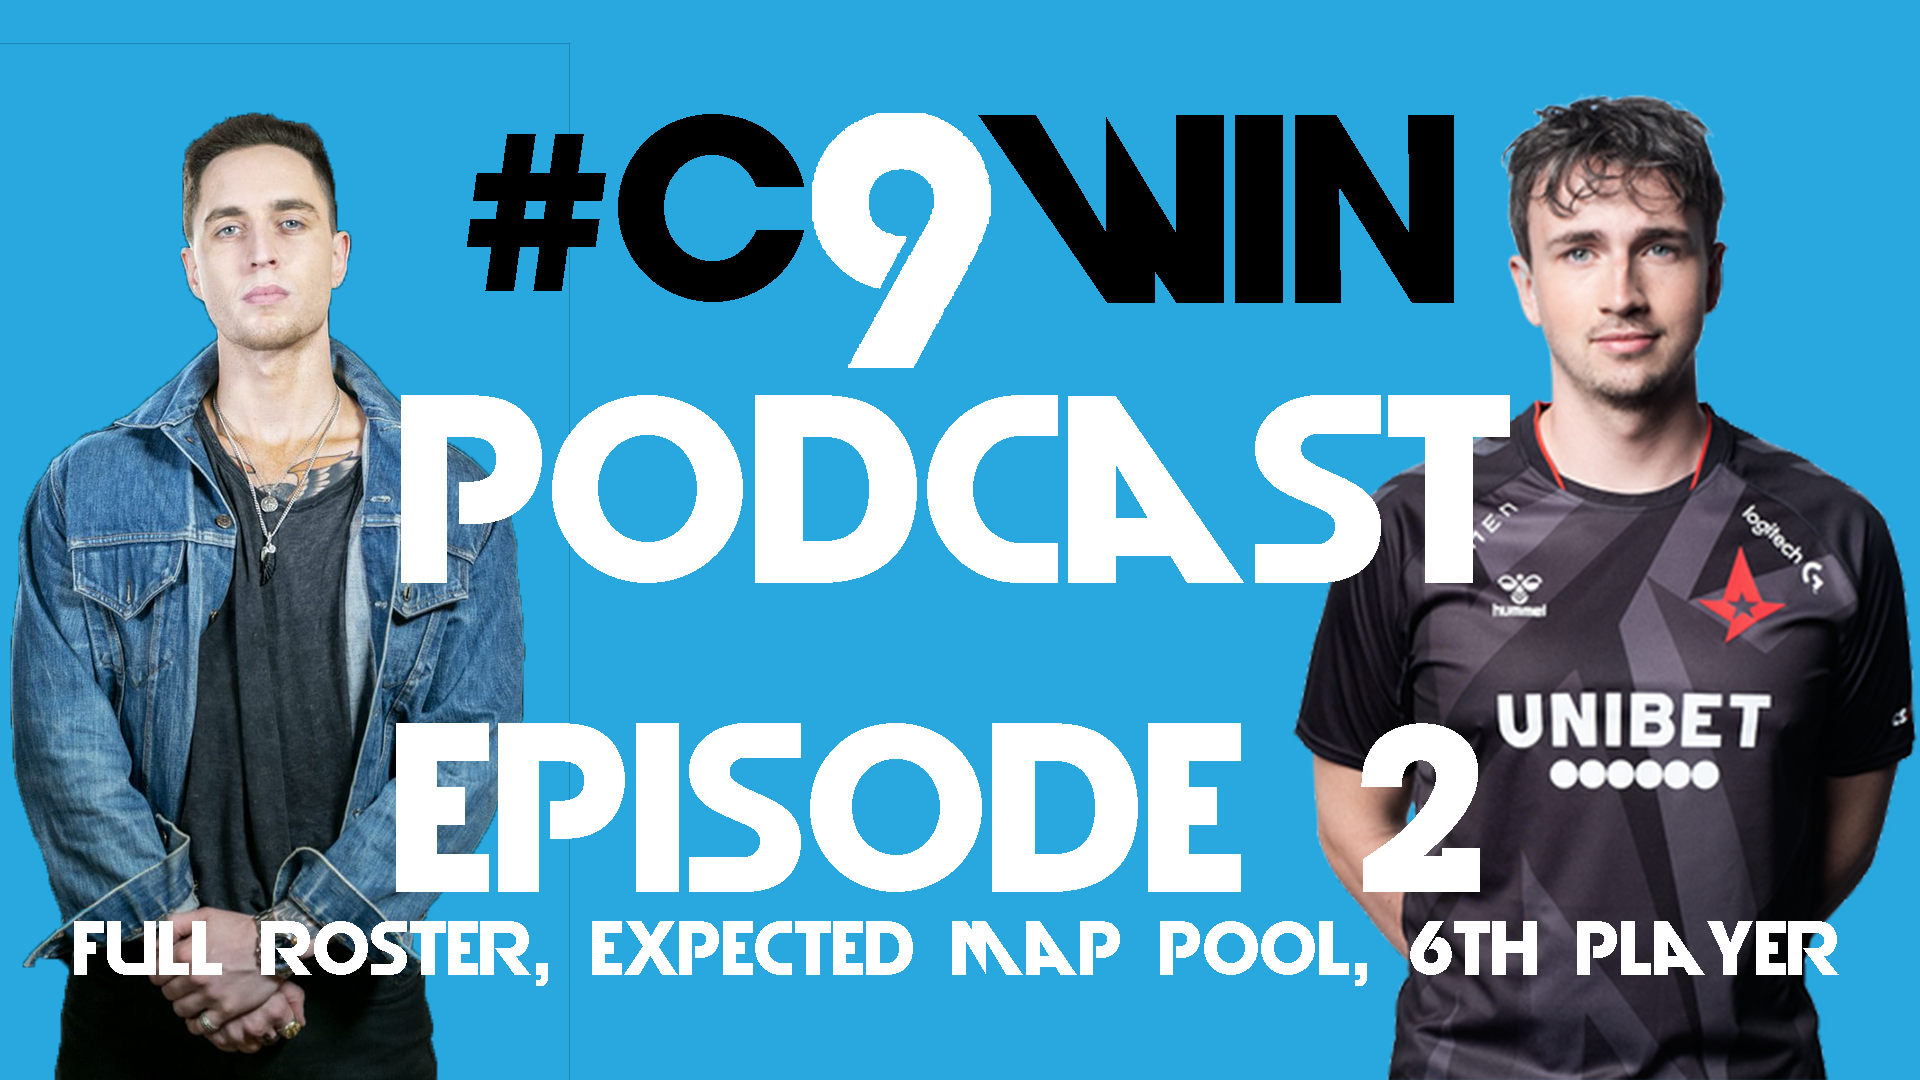 C9WIN Episode 2 - es3tag signed, map pool, 6th player